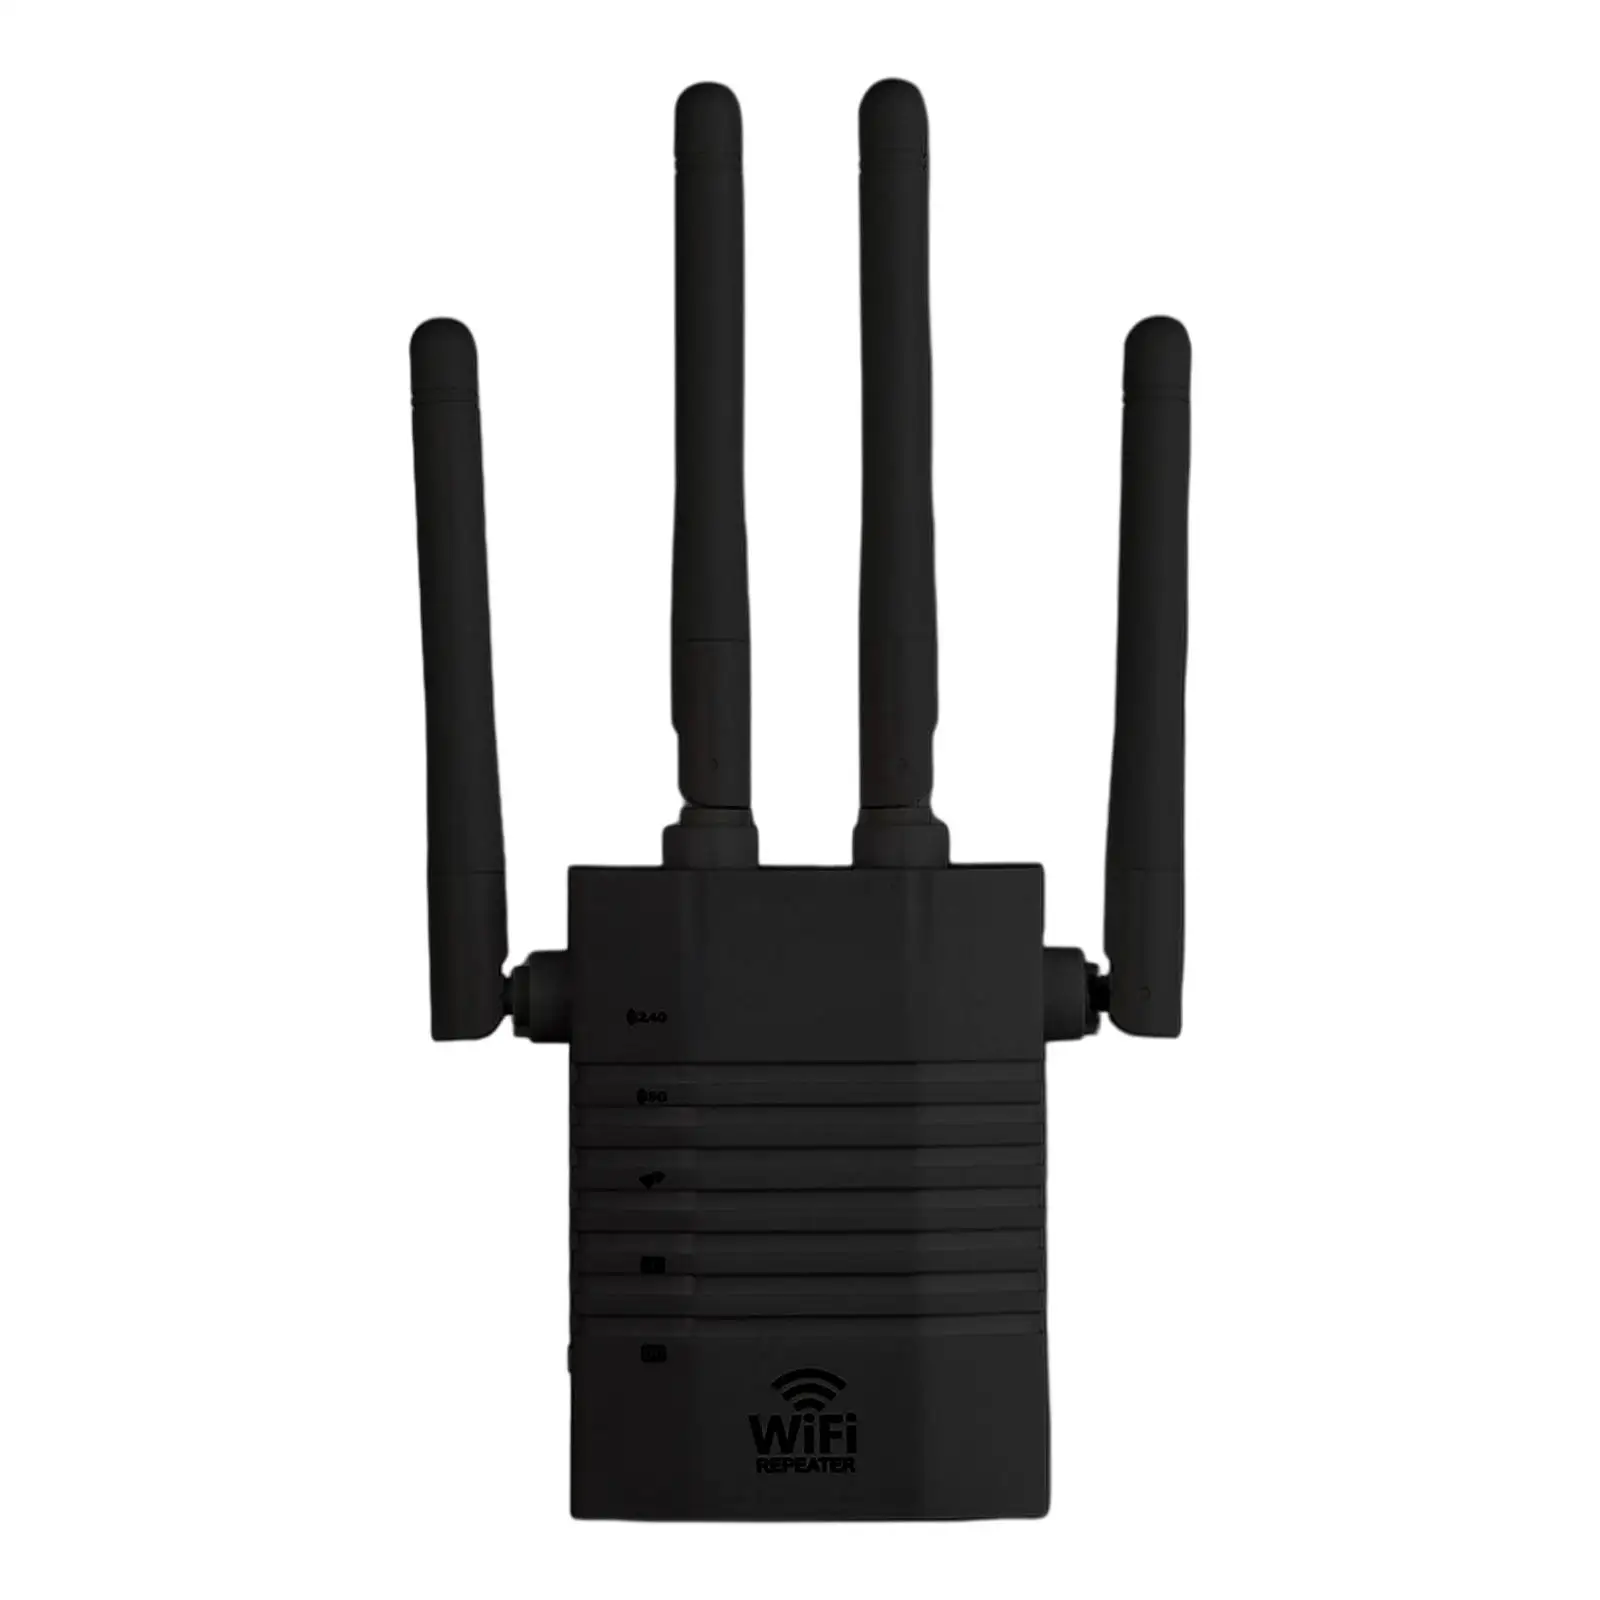 WiFi Range Repeater Black 2.4 & 5GHz Dual Band Wps Button Access Point with Ethernet Port Internet Amplifier Extender for Home